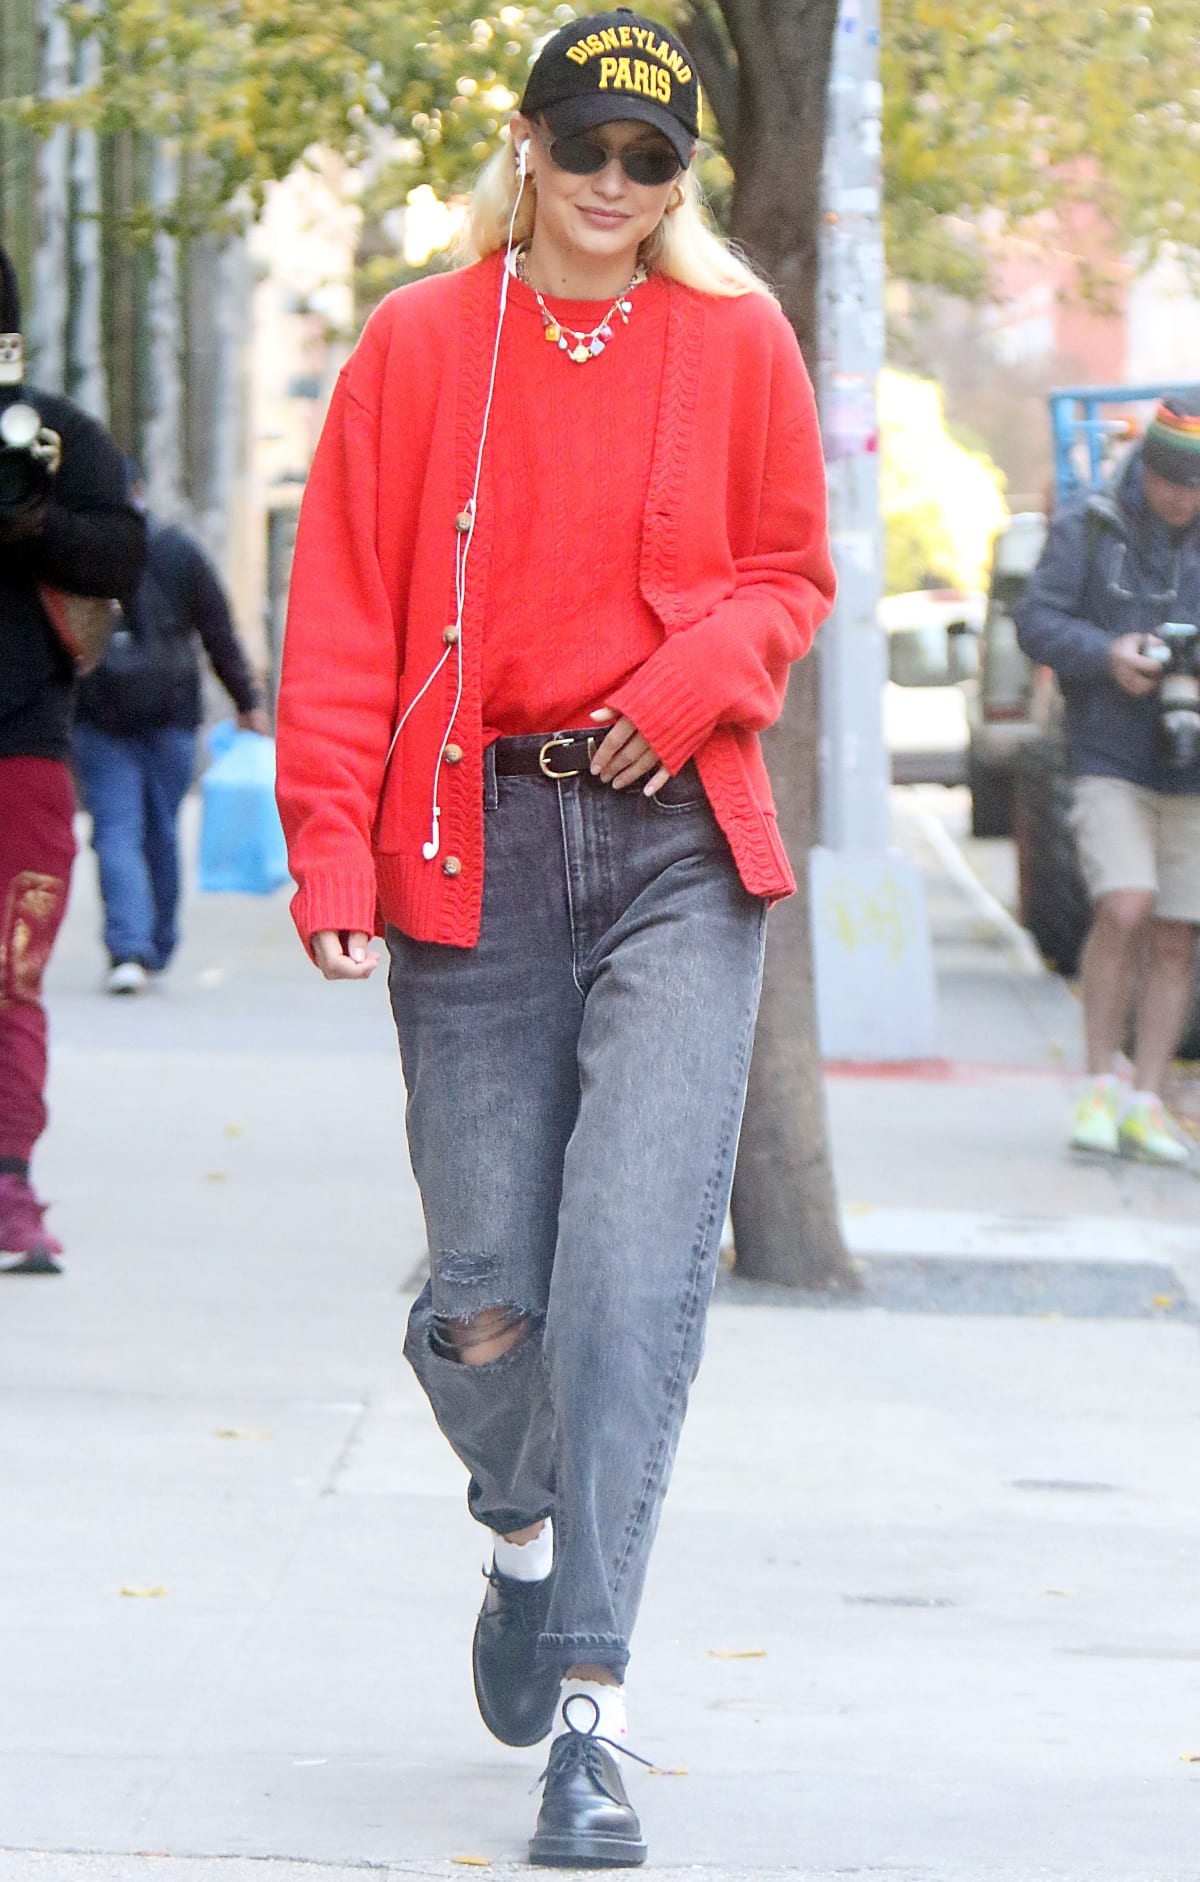 Gigi Hadid was difficult to miss in a vibrant red Guest in Residence cardigan while out and about in New York City